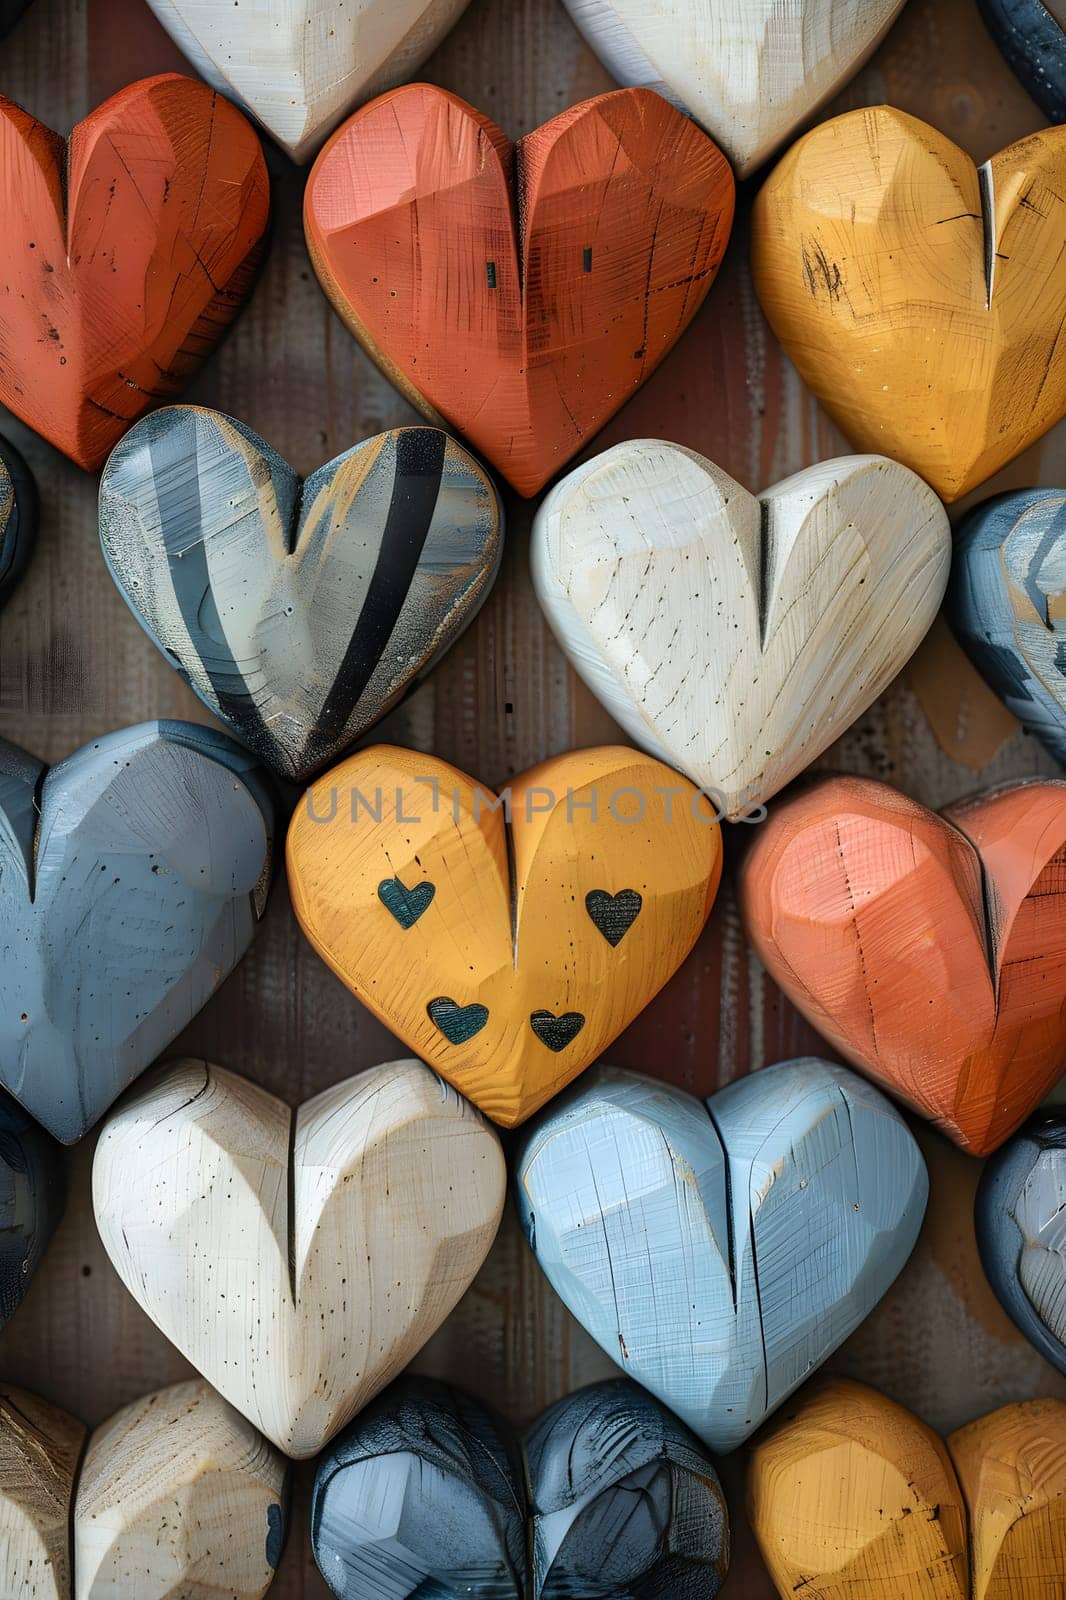 A collection of wooden hearts arranged in a symmetrical pattern on a wooden table. The electric blue accents on the hearts add an artistic touch to this natural art piece